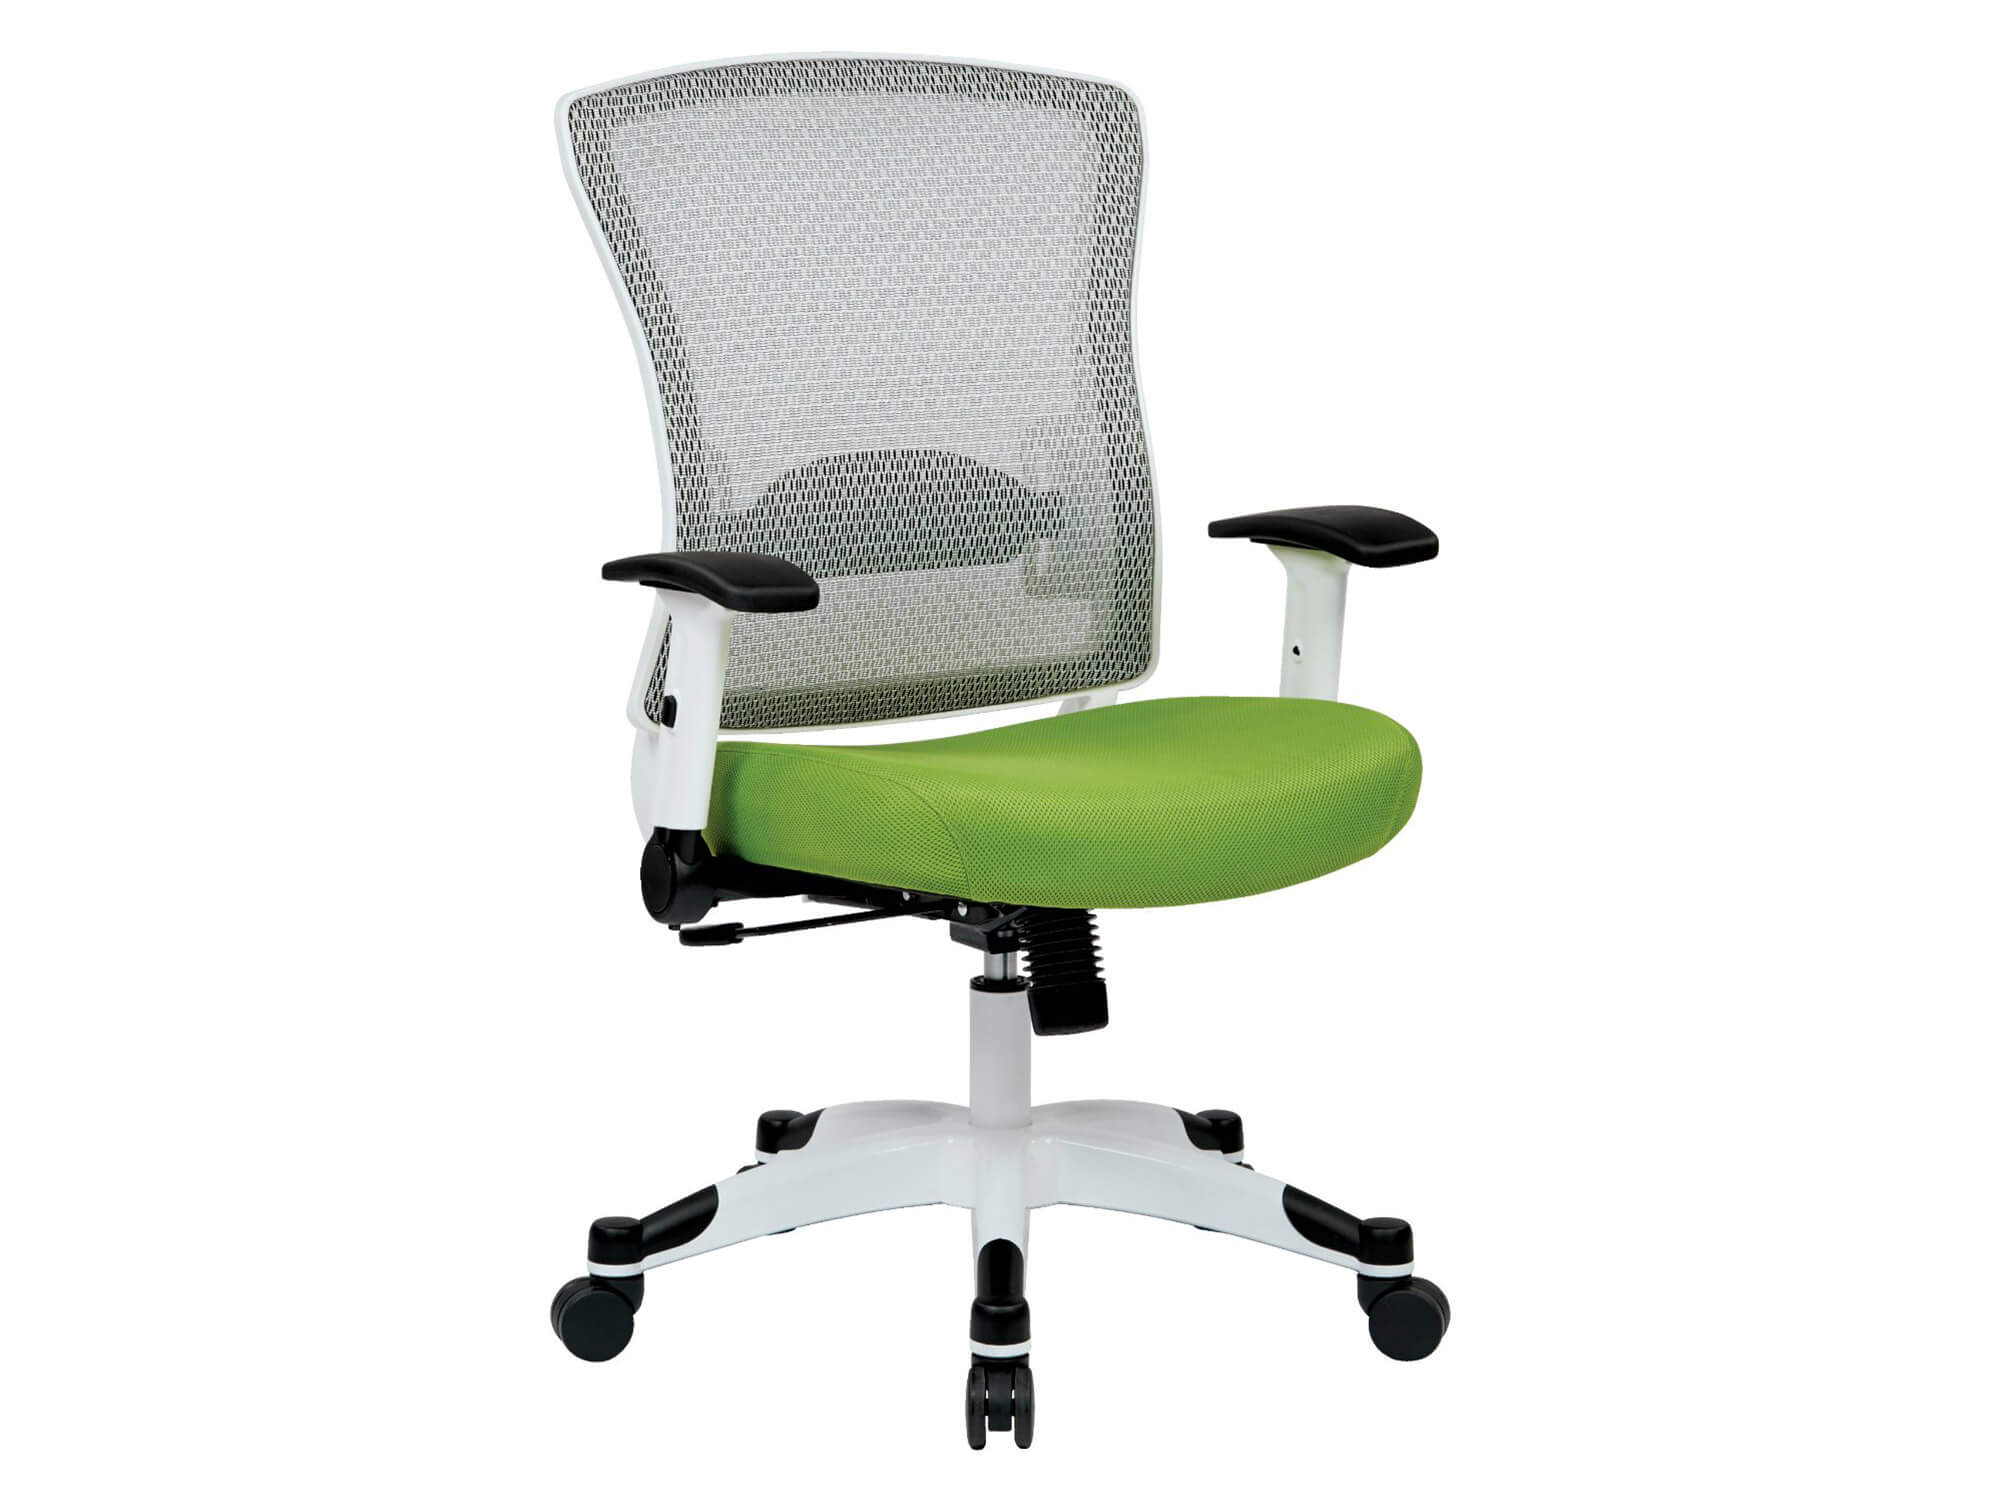 chairs-for-office-green-office-chair.jpg